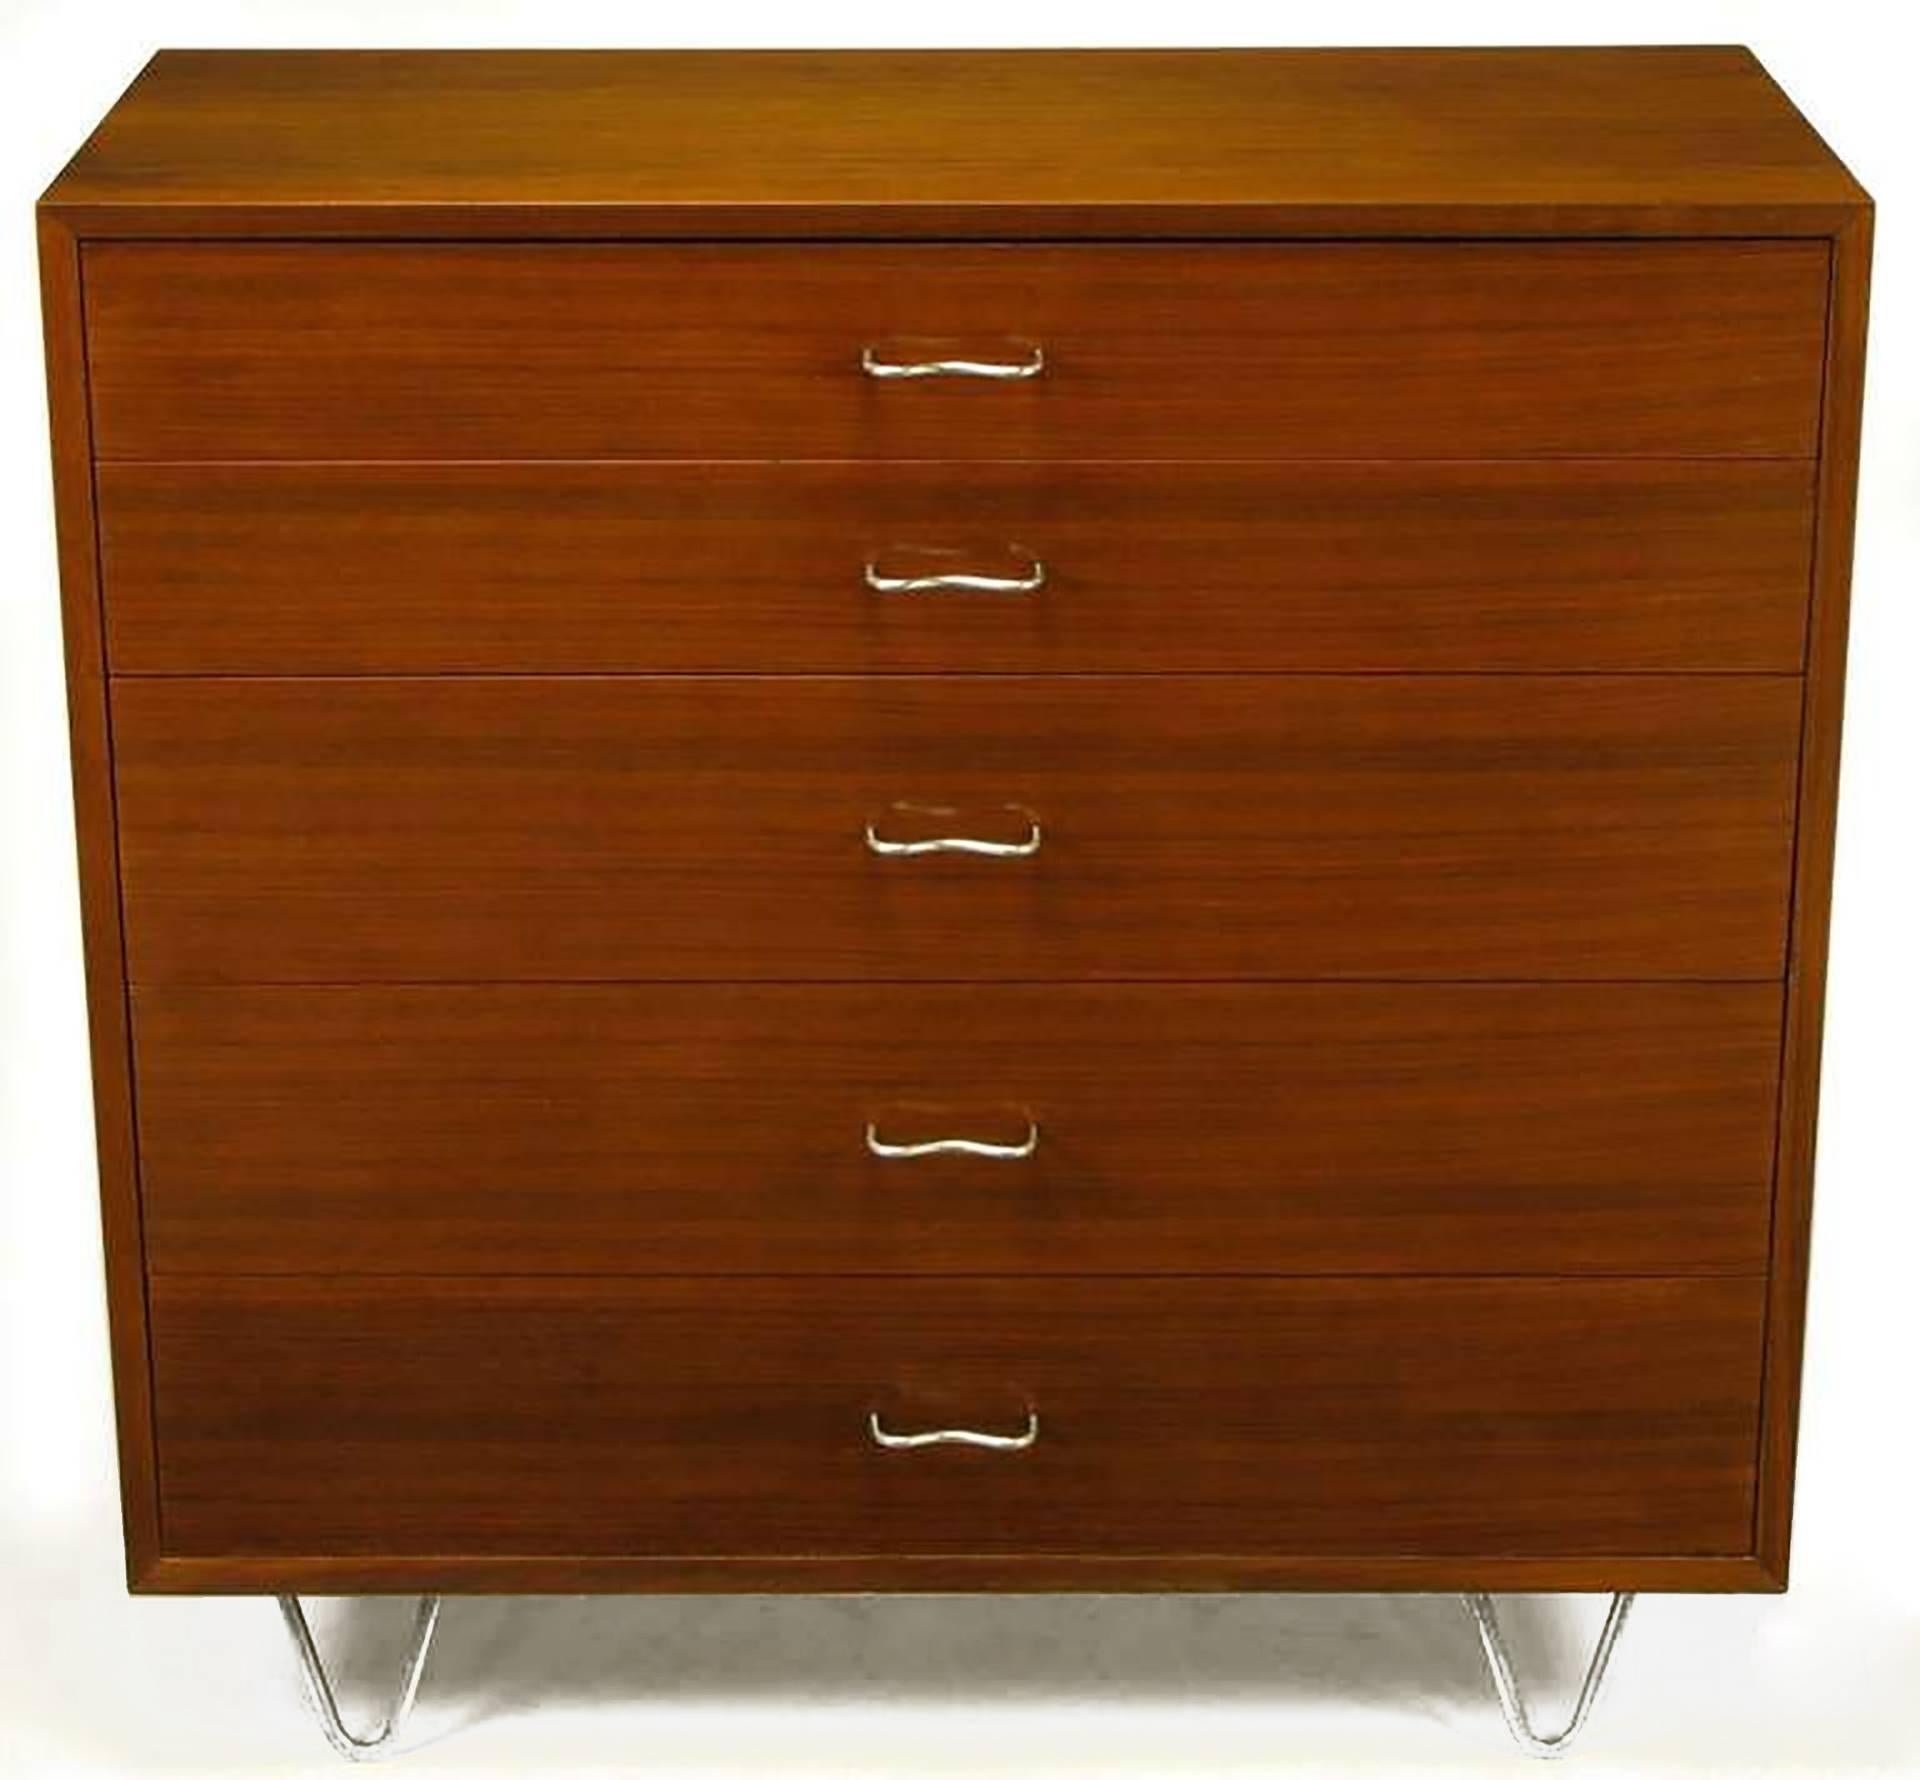 Mid-Century Modern Five-Drawer Ribbon Mahogany Tall Dresser by George Nelson for Herman Miller For Sale